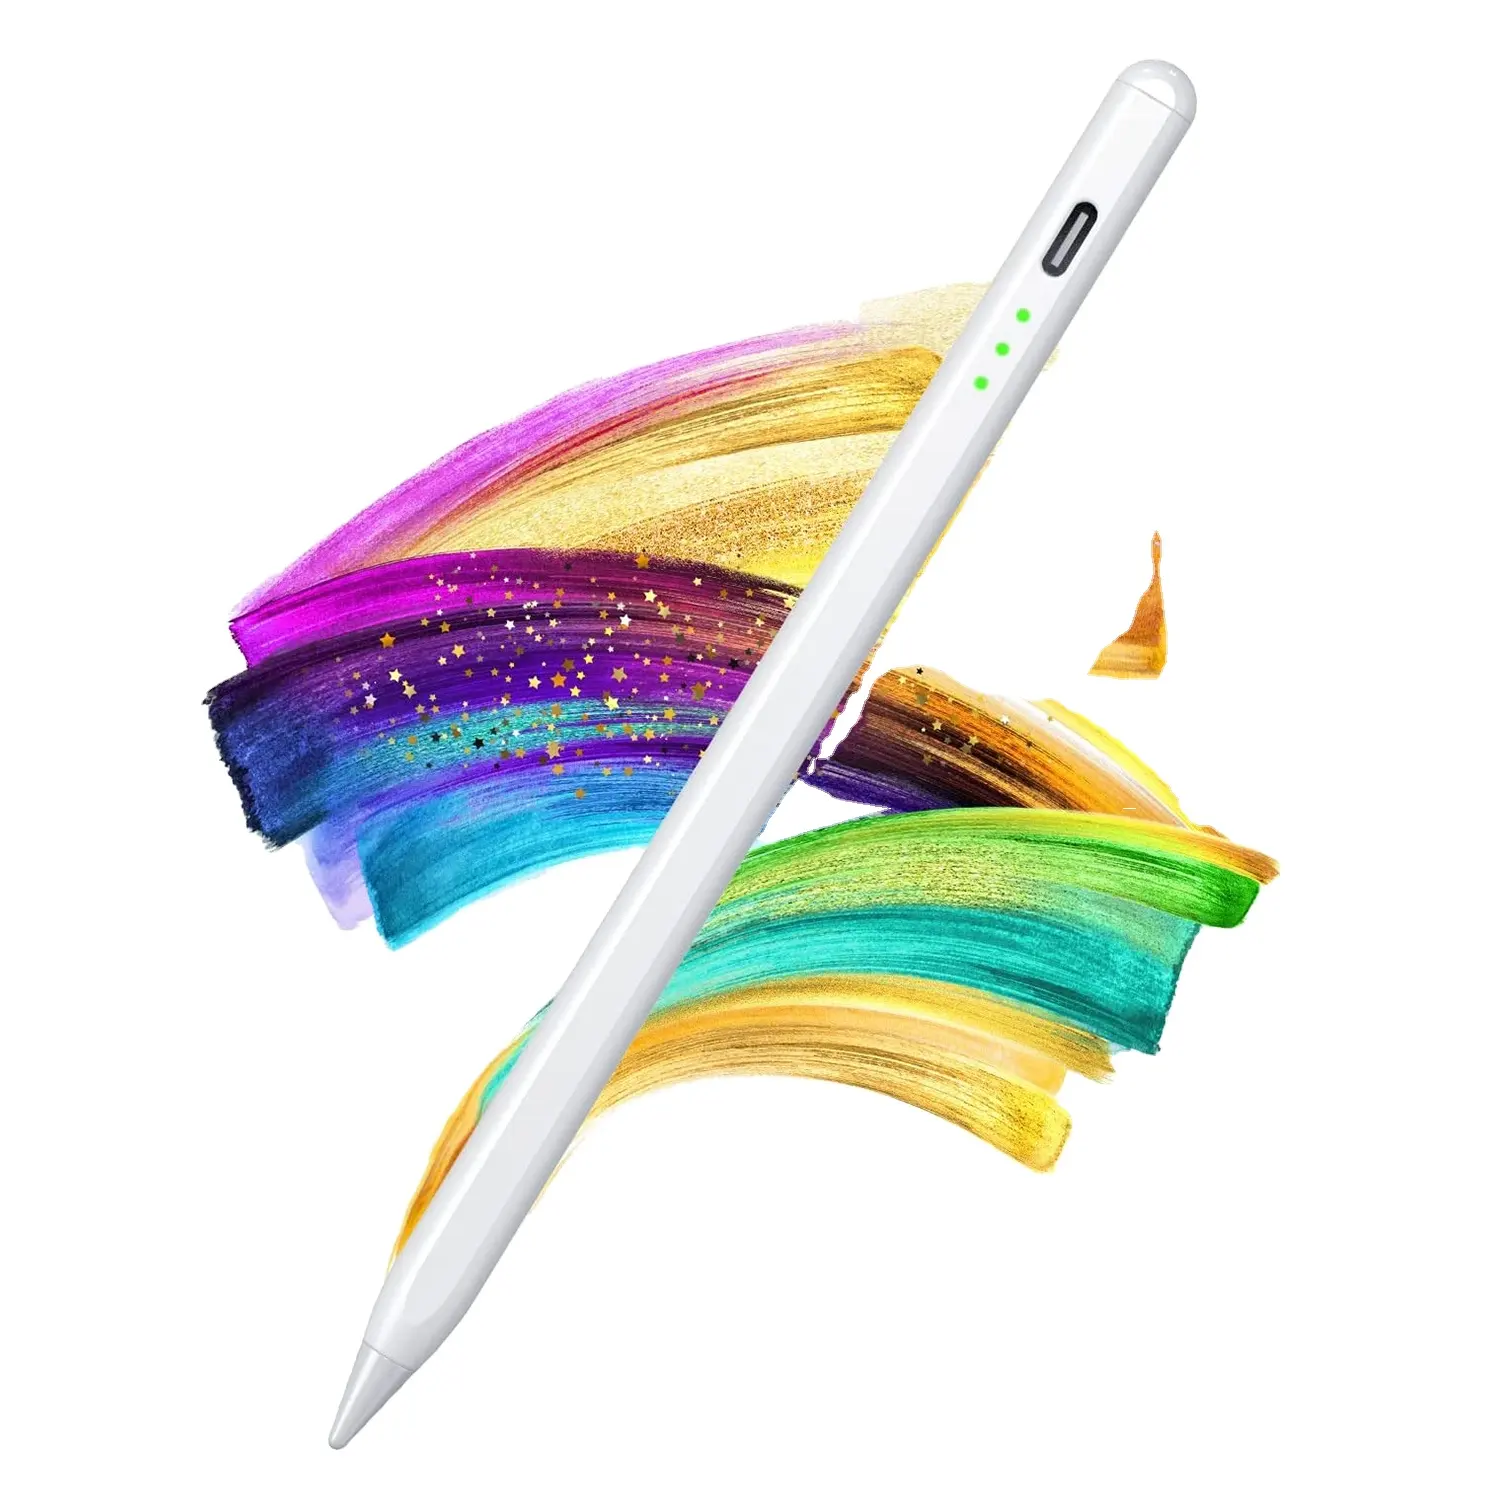 Magnetic Tilt Bold Support Battery Status Indicator iPad Air iPhone Engraved Palm Rejection Touch Pen Writing Apple Pencil